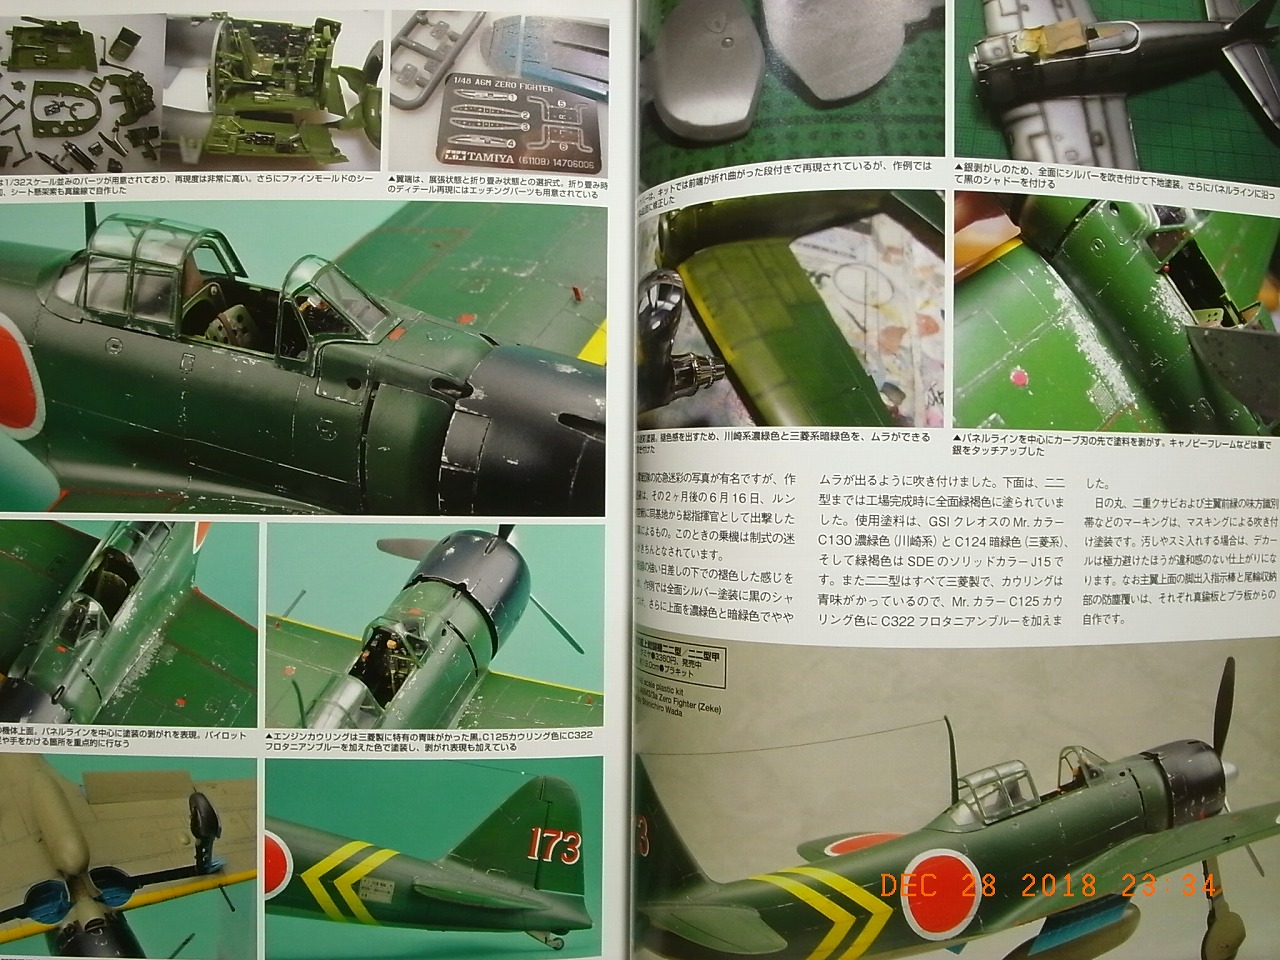 Details about   "Mitsubishi Type Zero Fighter" Pictorial book JAPAN Graphic action Series 